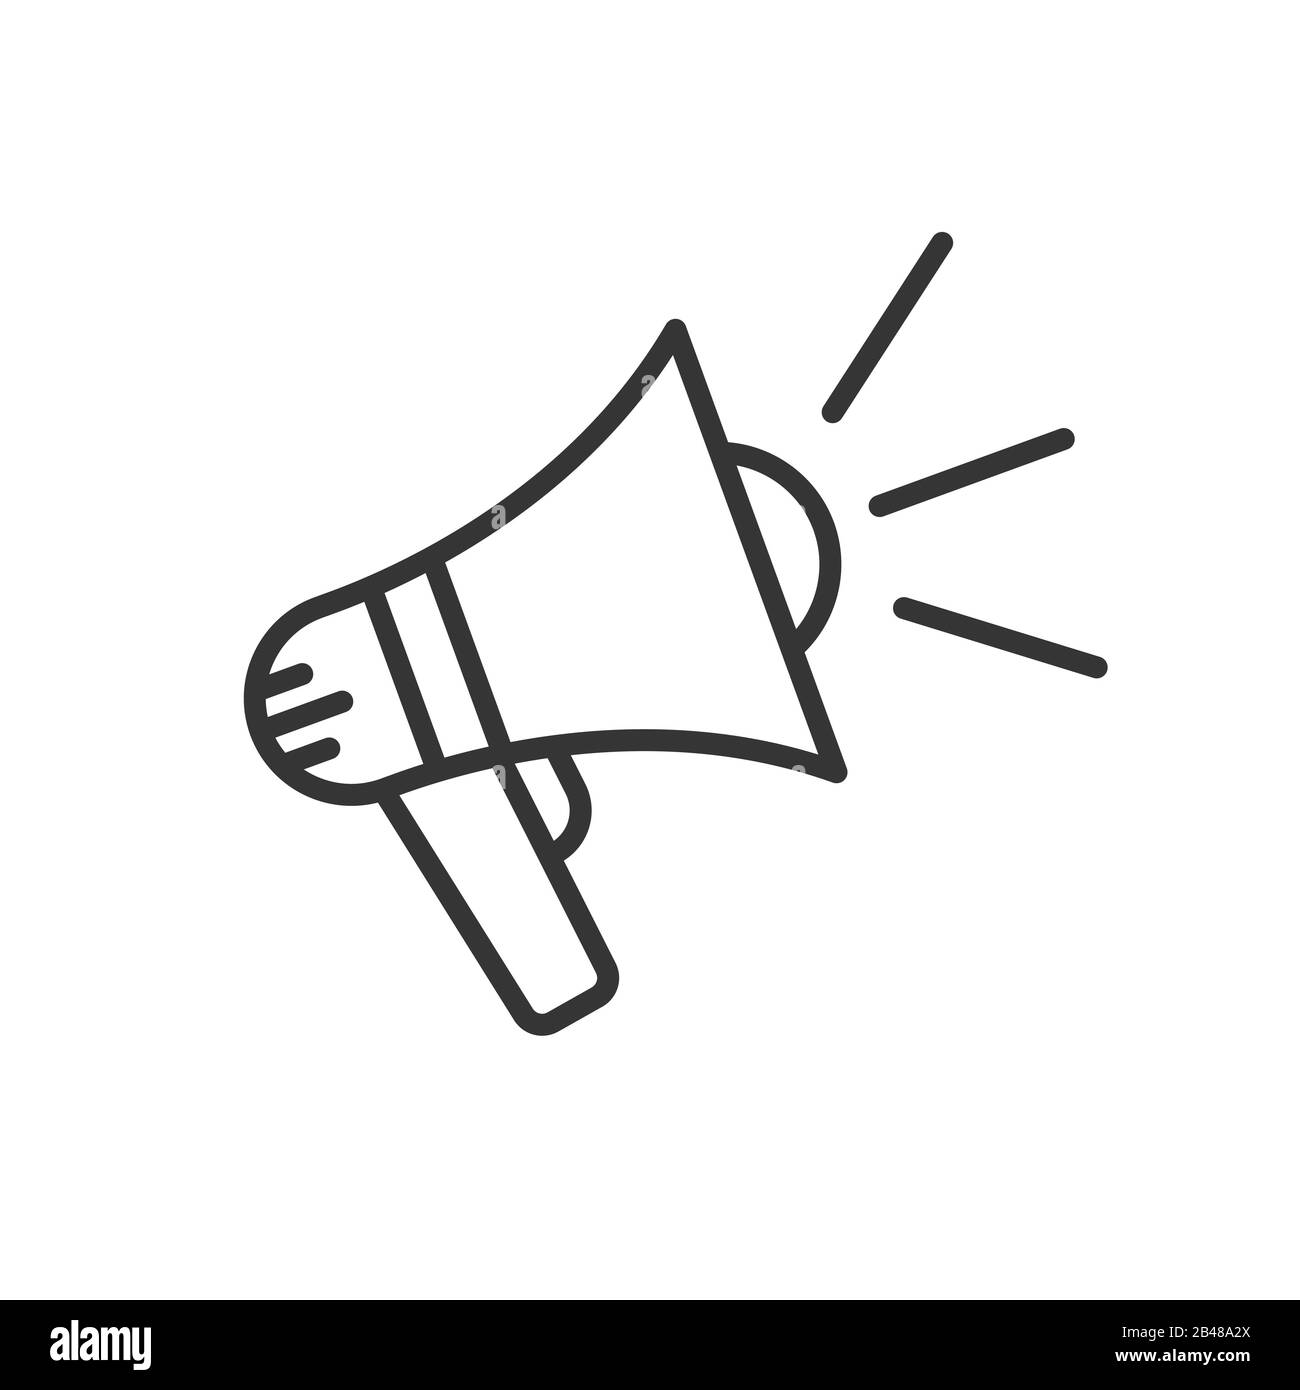 Symbol of rally or protest. Black Megaphone icon isolated. Vector Loudspeaker icon. Stock Vector